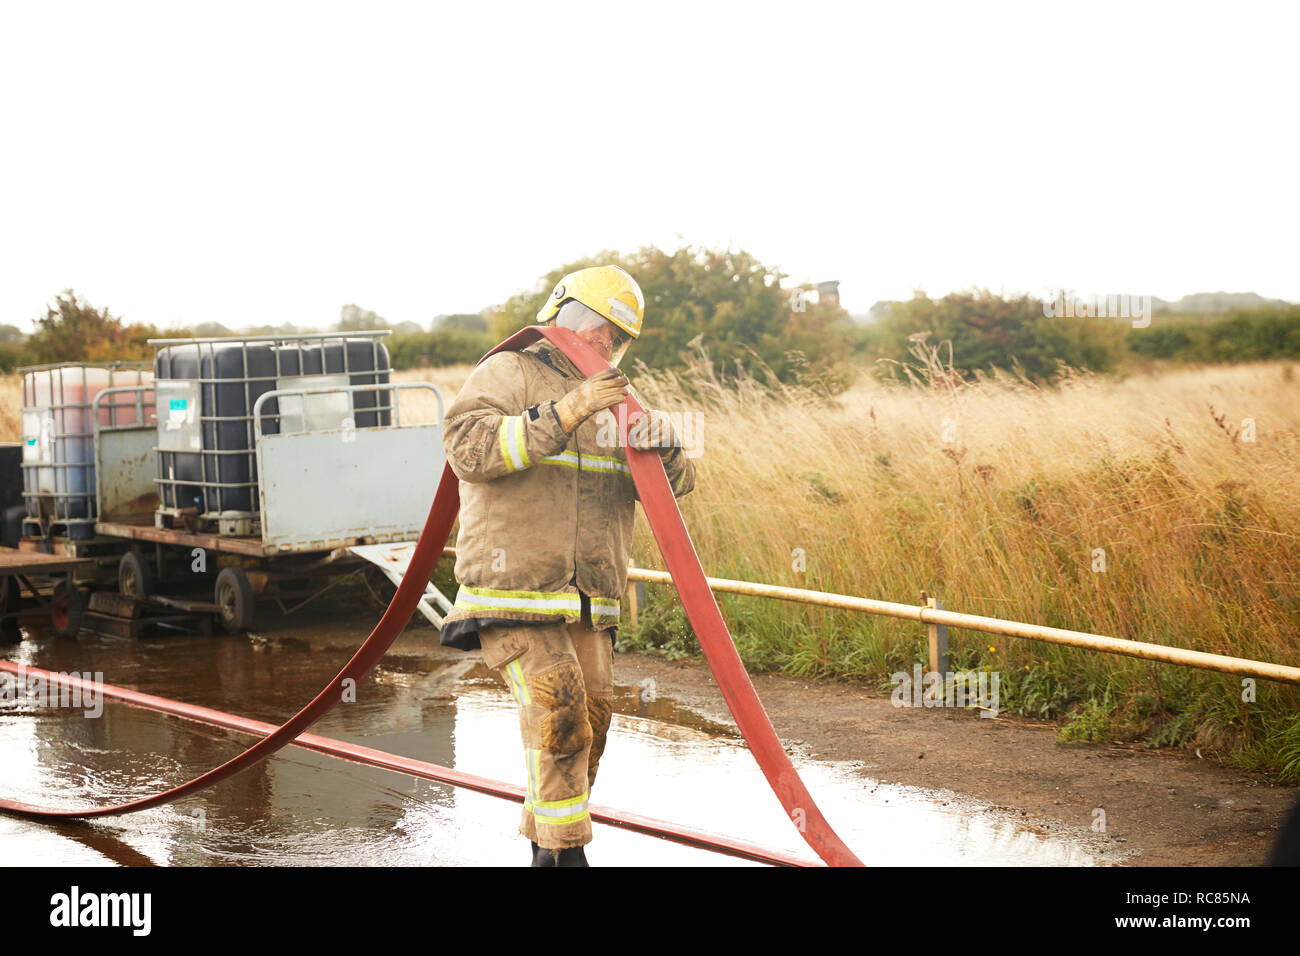 Firemen training, fireman carrying fire hose over his shoulder at training facility Stock Photo